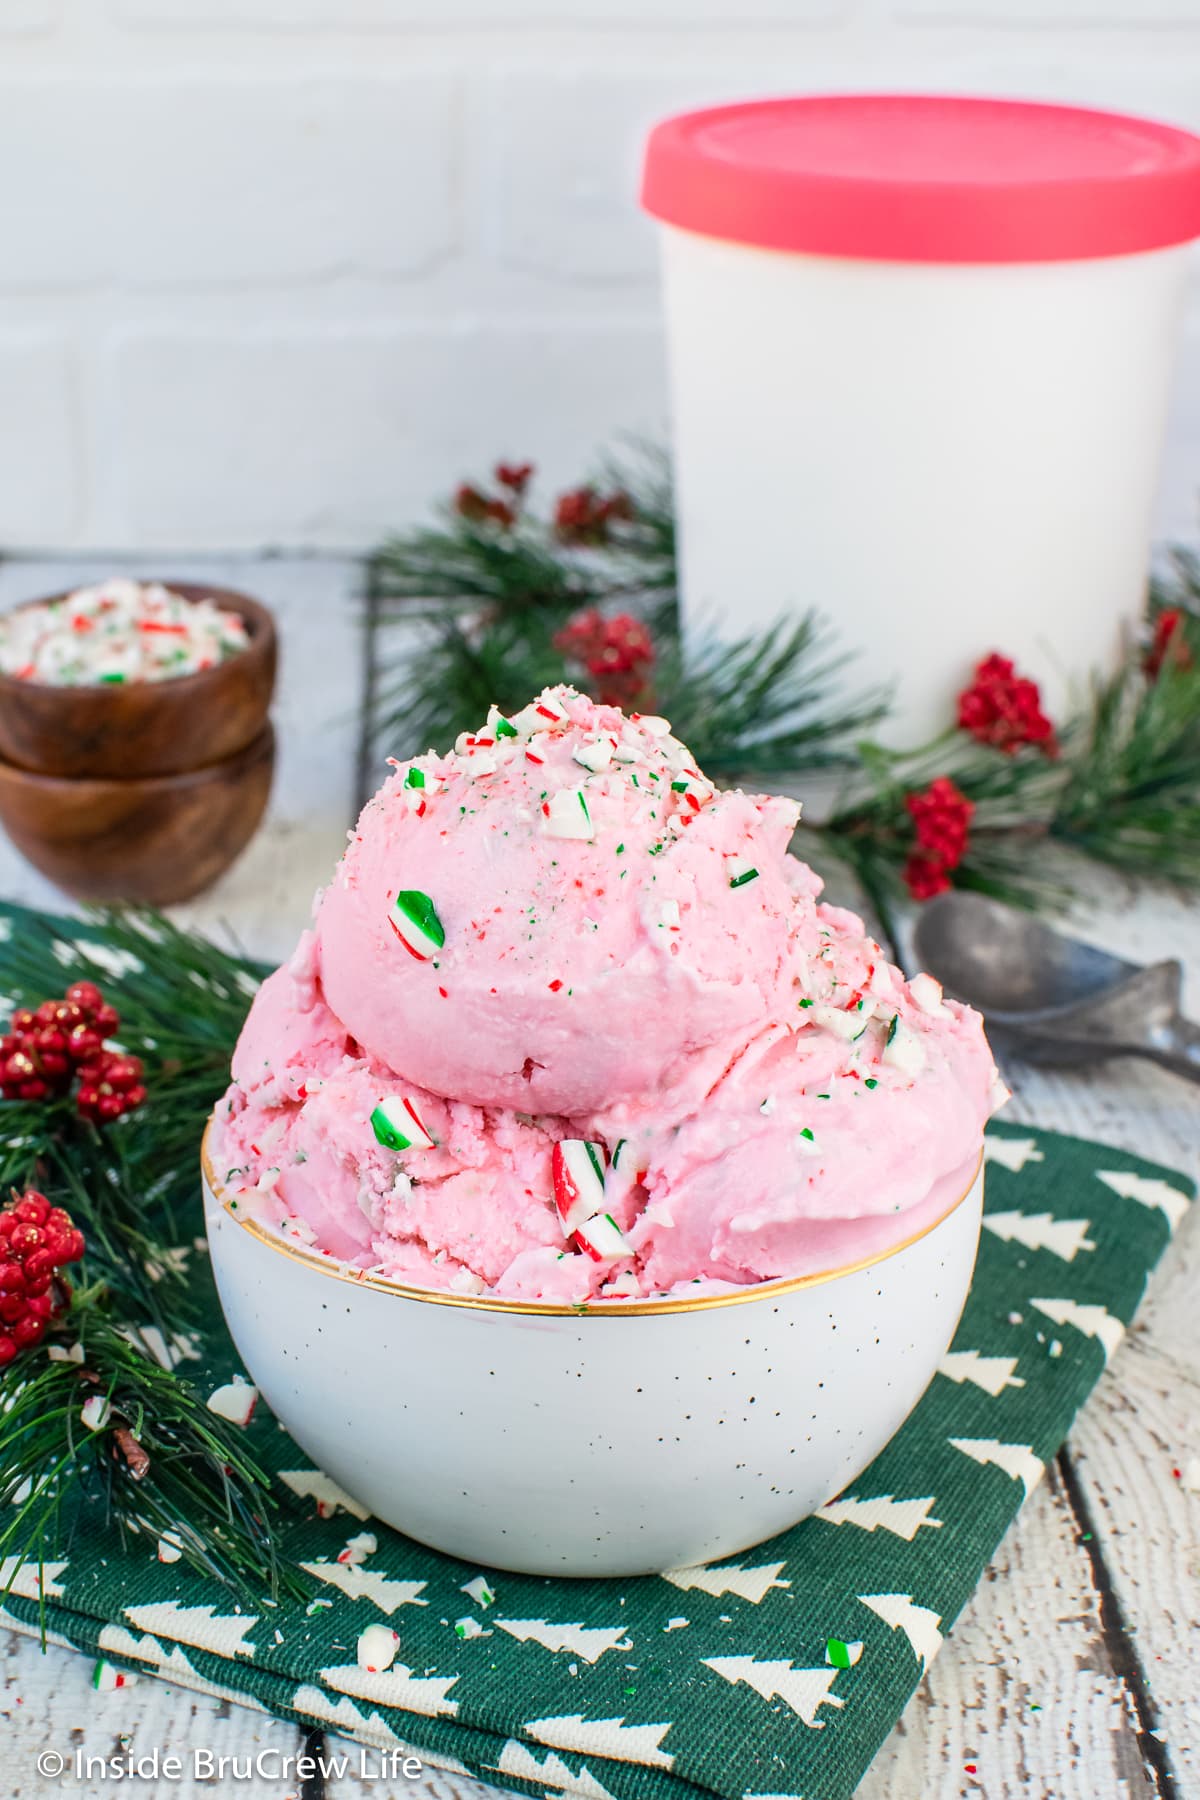 A white bowl filled with pink ice cream.